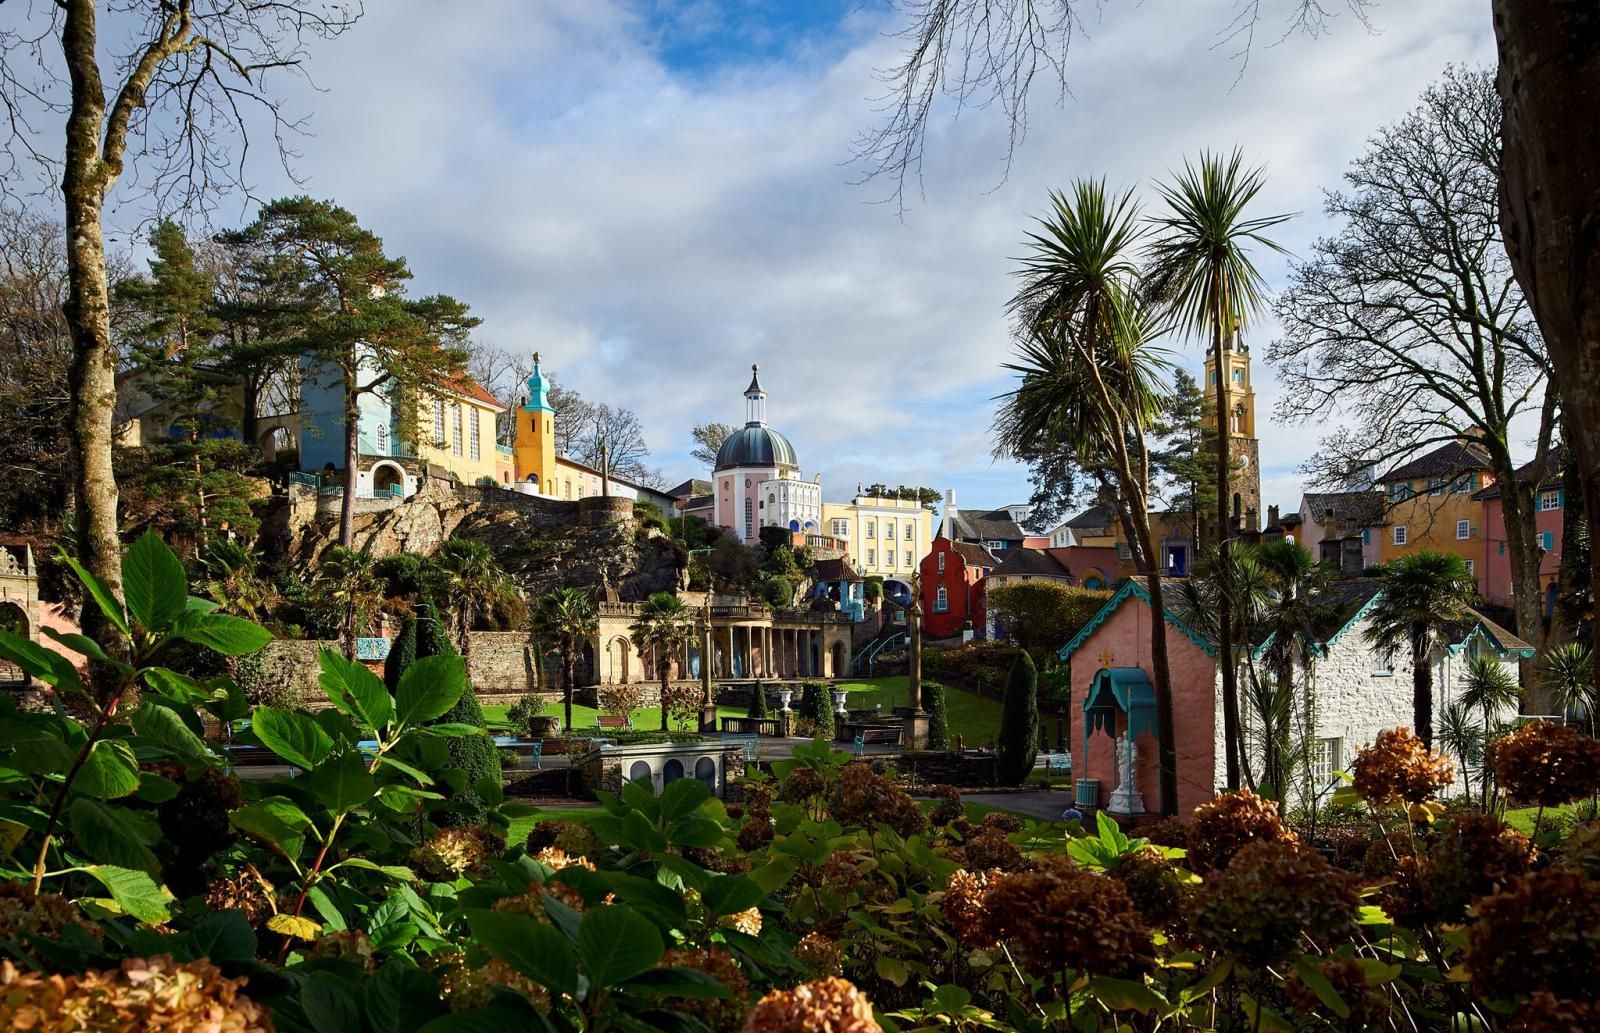 Visit Portmeirion Village | Things to do in North Wales